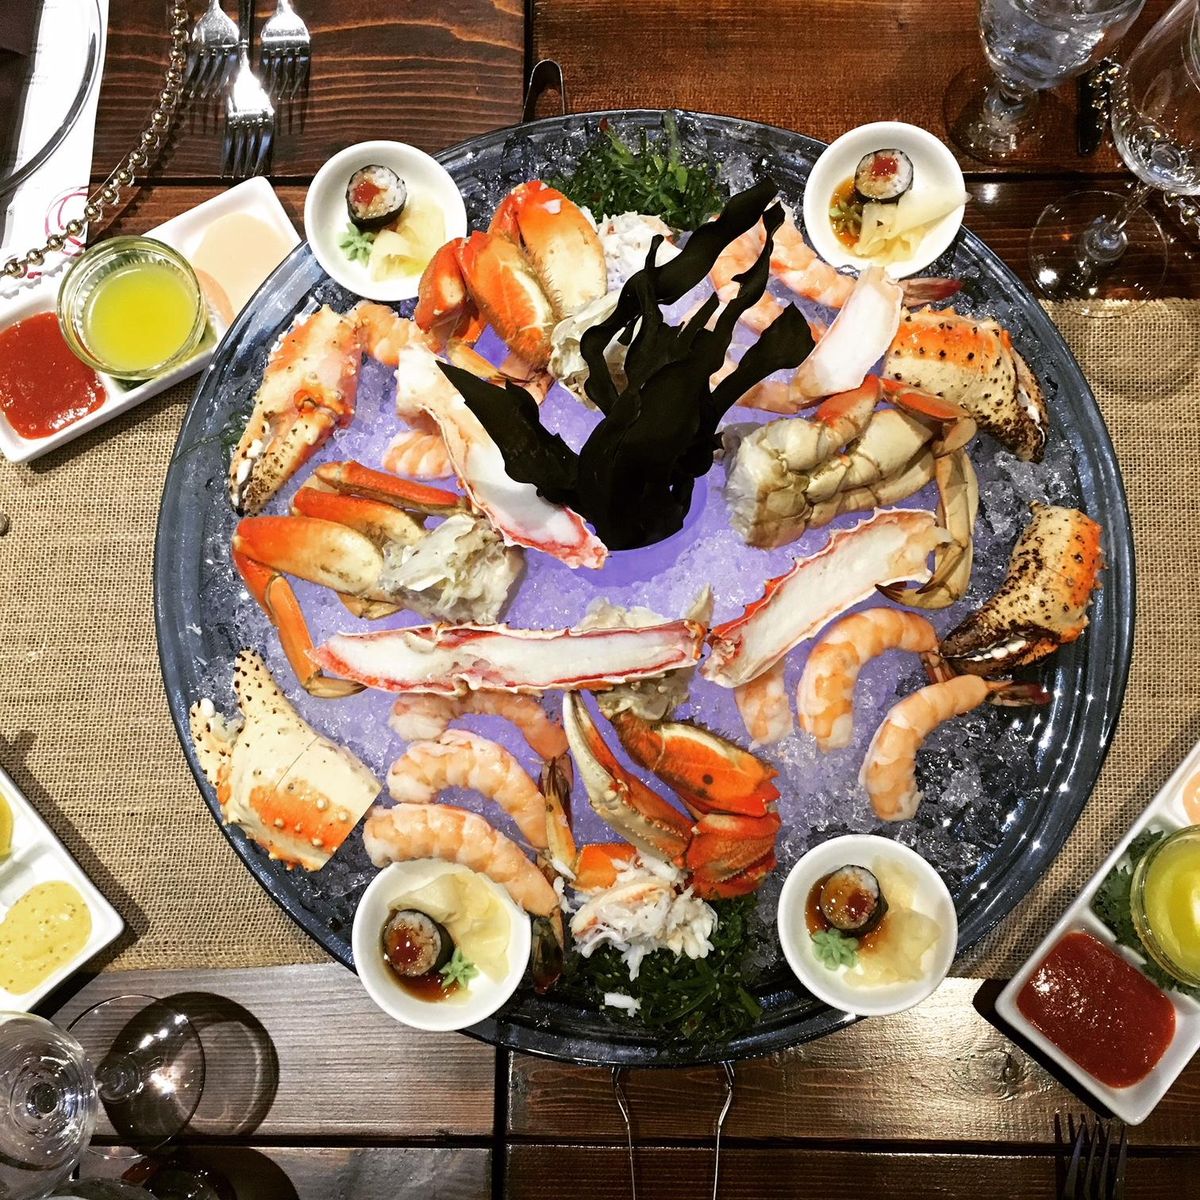 This seafood platter was a highlight of one of the Saturday night dinners during the first-time food and wine festival in Coeur d’Alene this year. (Adriana Janovich / The Spokesman-Review)